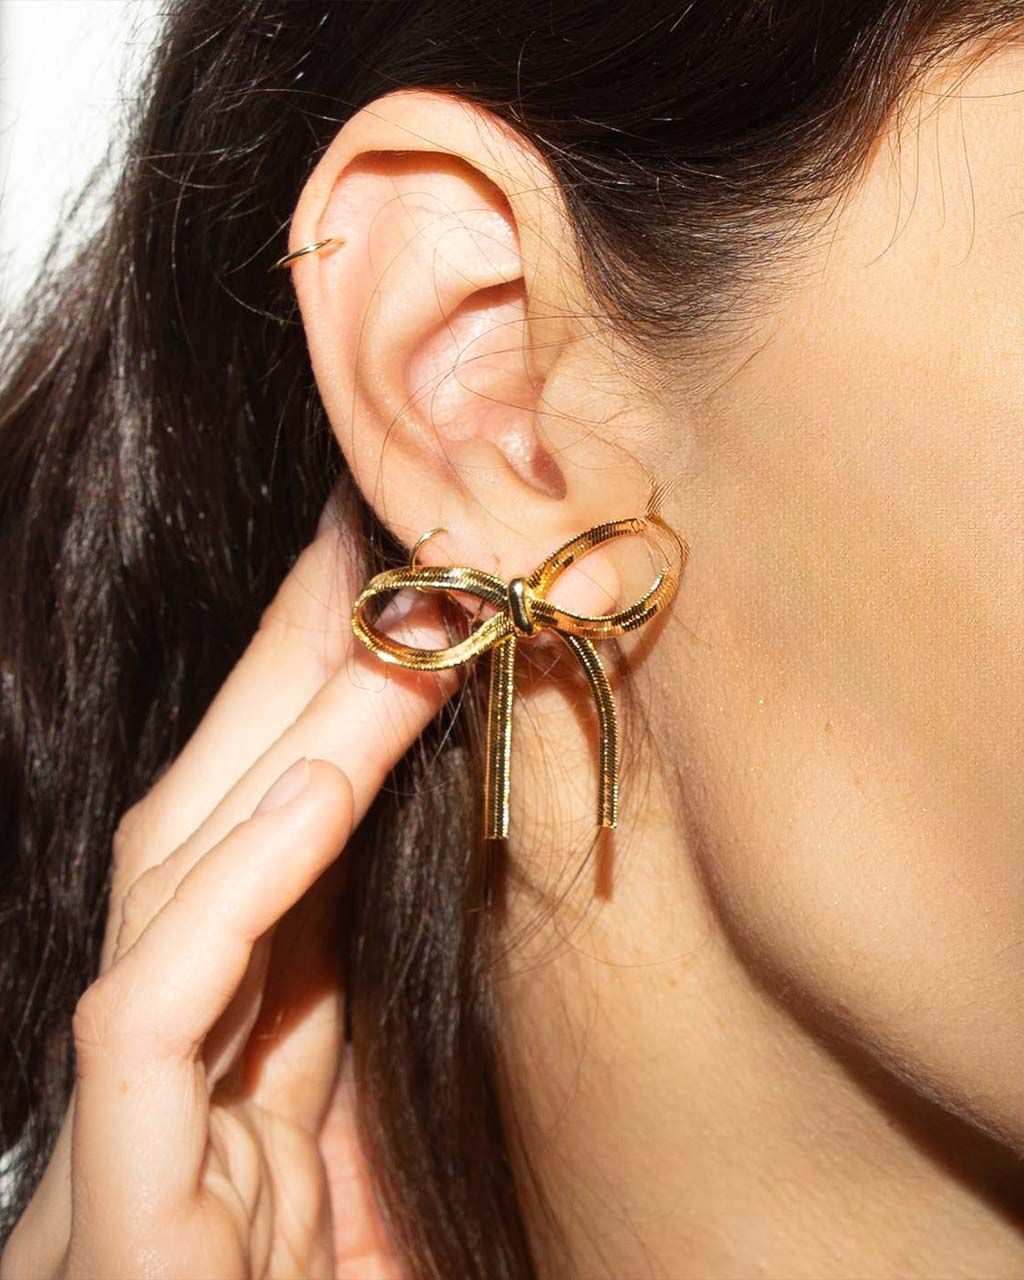 The Bow Is Mine Stud Earrings | ban.do